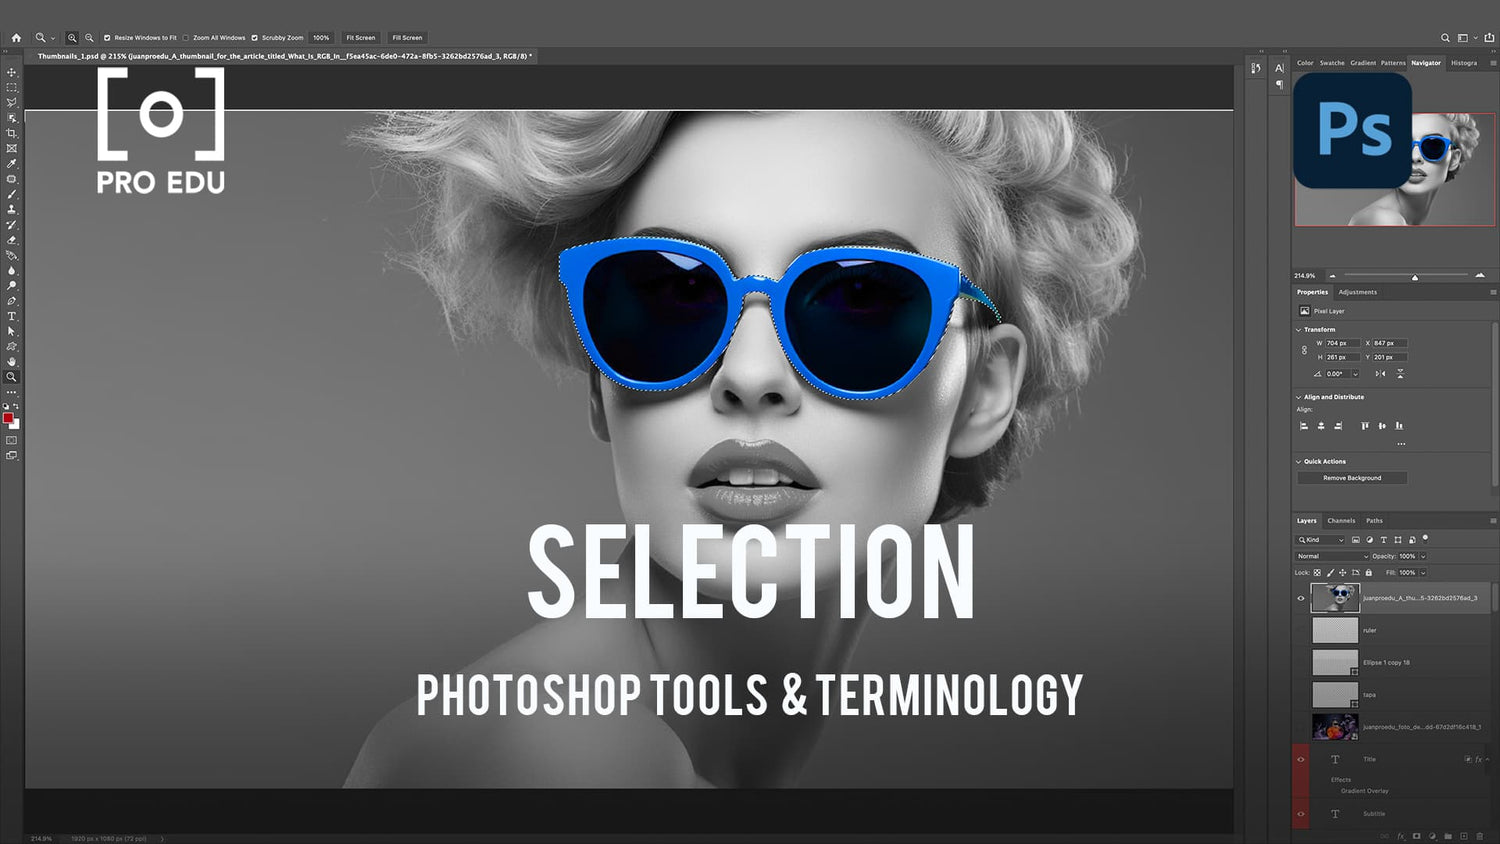 Selection Tools in Photoshop - PRO EDU Tutorial